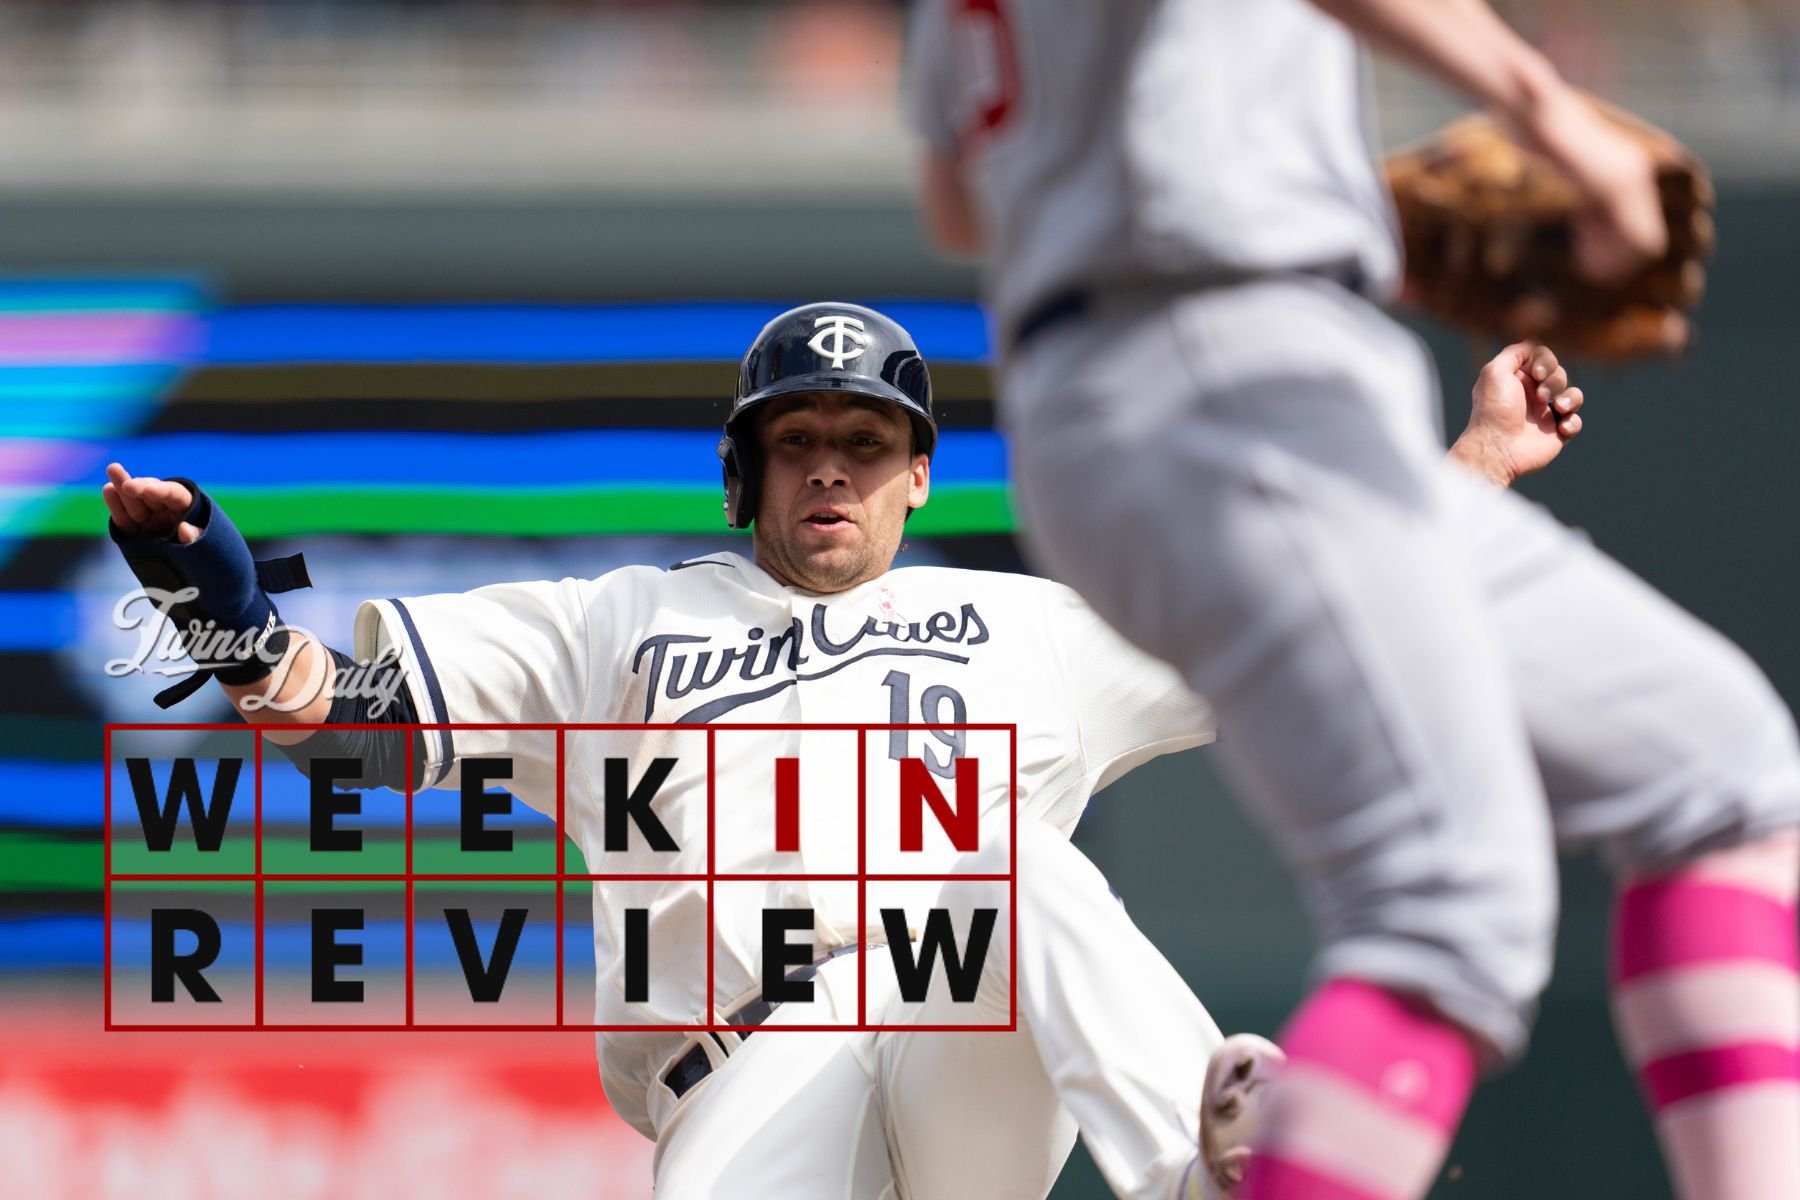 Twins to face Angels star Shohei Ohtani on Friday night at Target Field